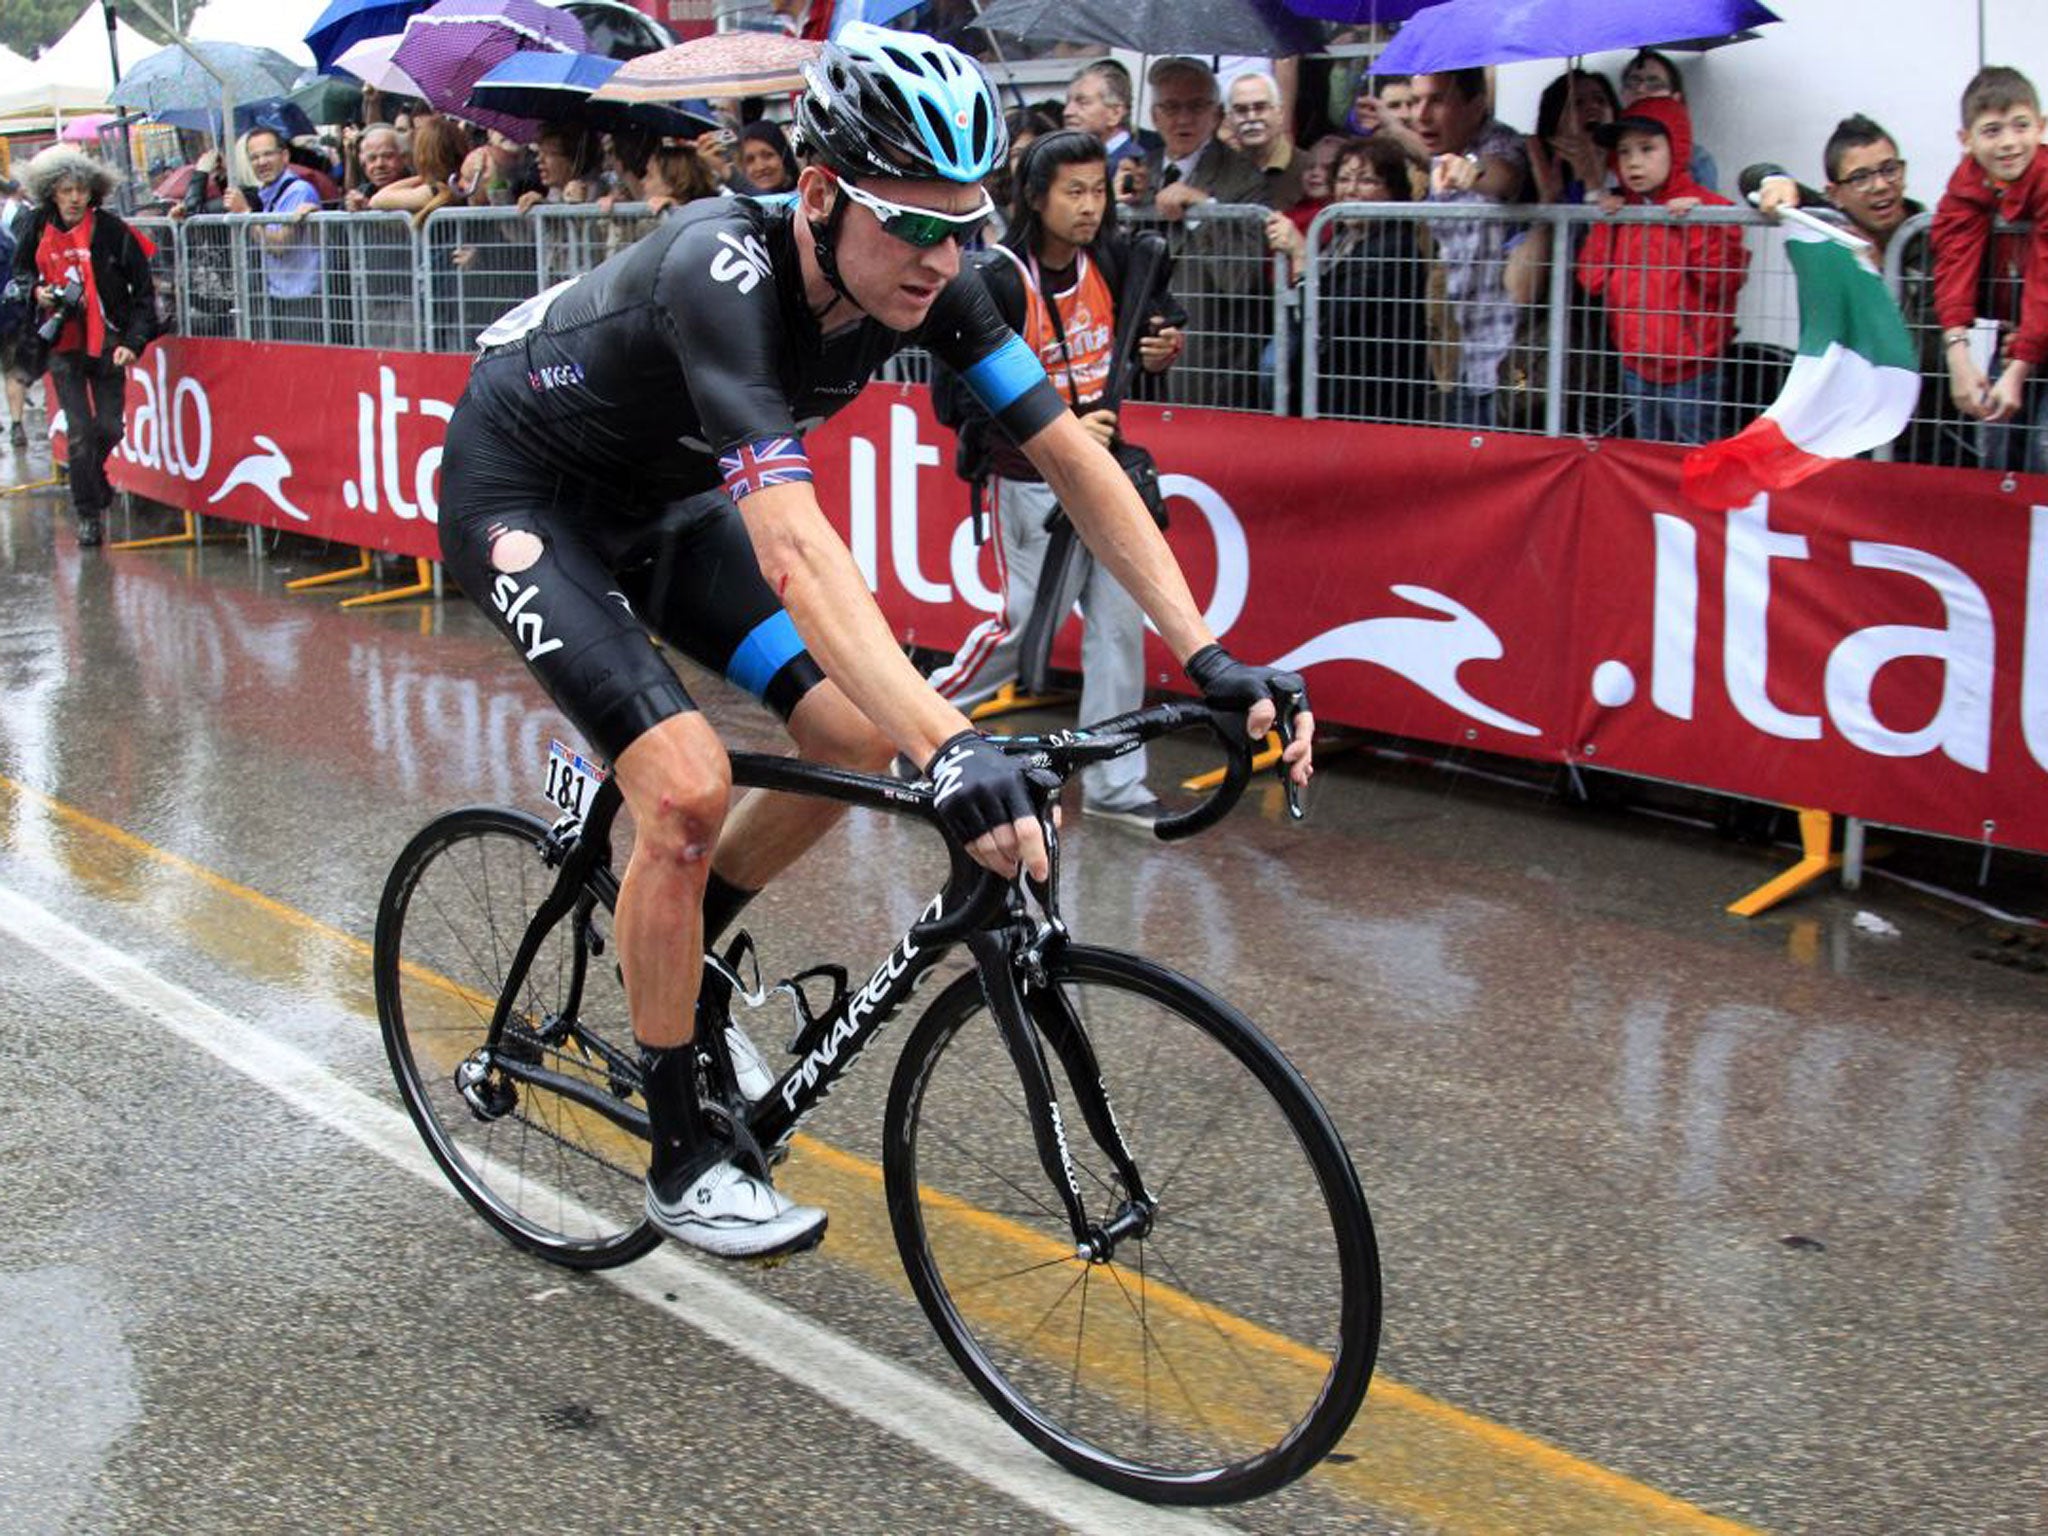 Bradley Wiggins will not defend his Tour de France title after Team Sky yesterday decided there was not enough time for the Briton to recover sufficiently from a knee injury